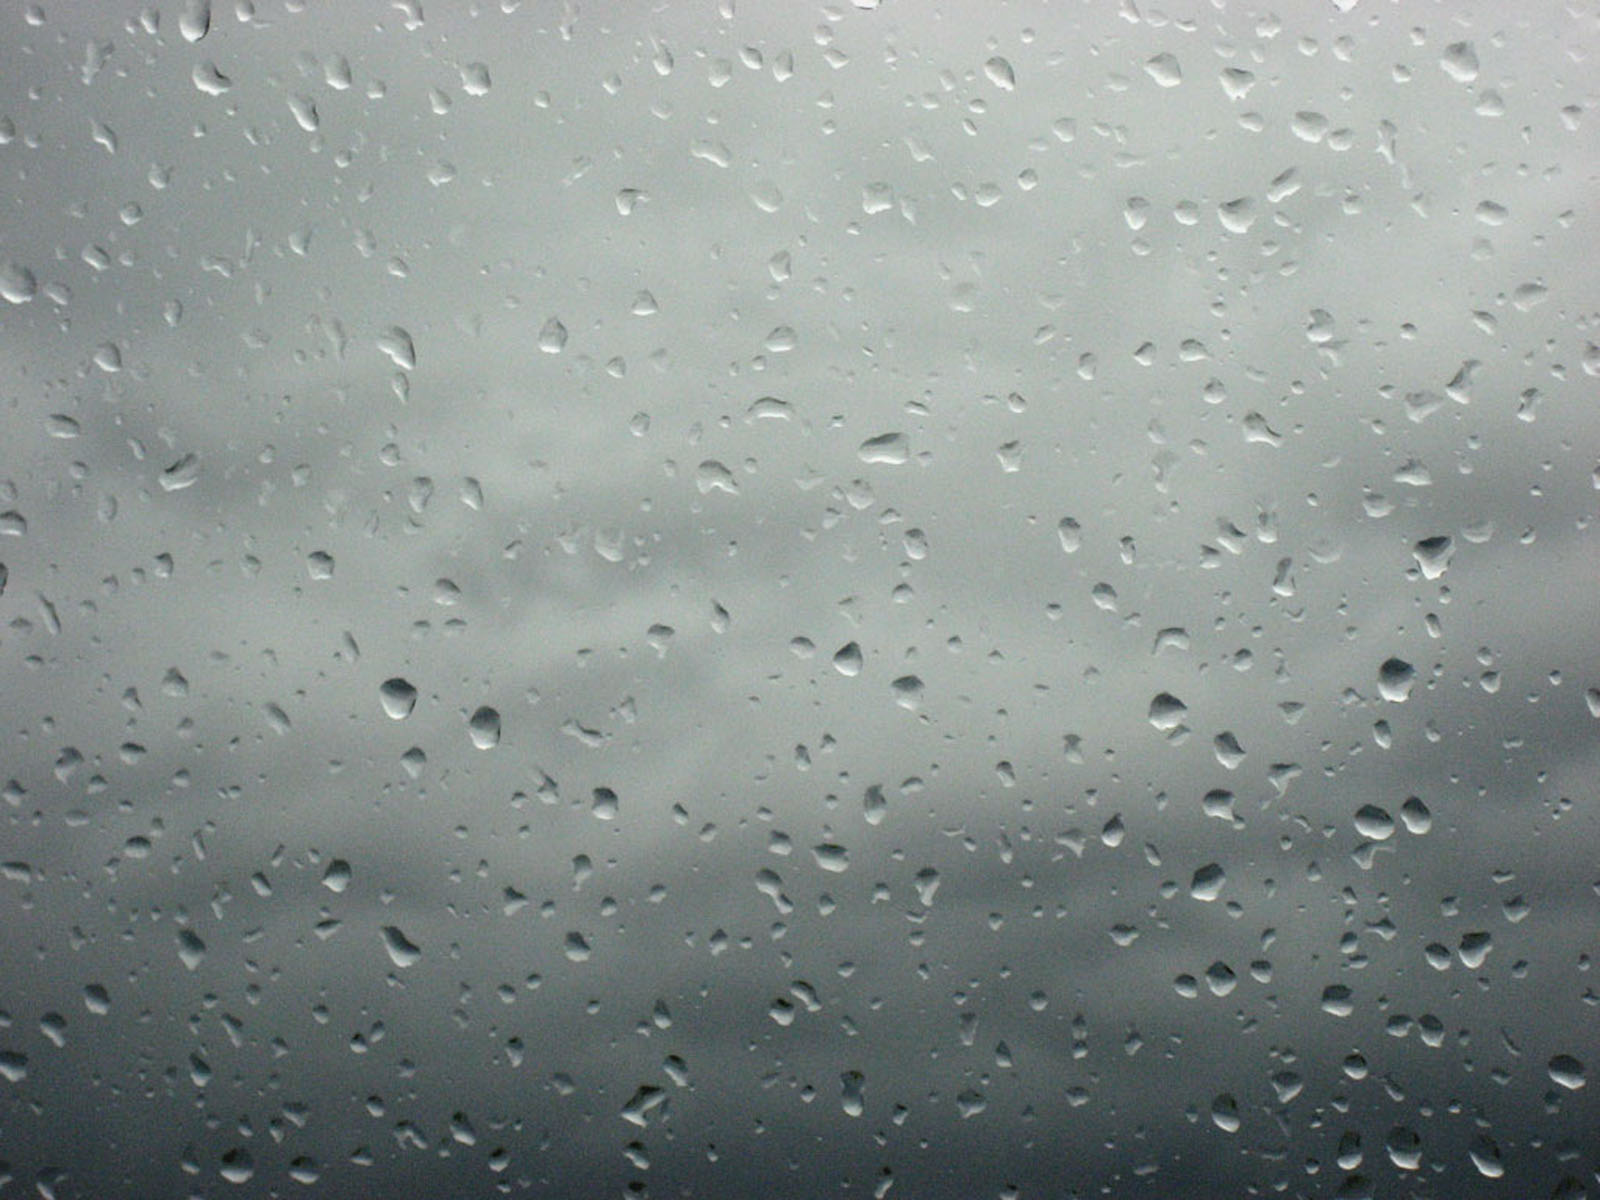 Tag Rain Drops On Glass Wallpaper Image Photos And Pictures For